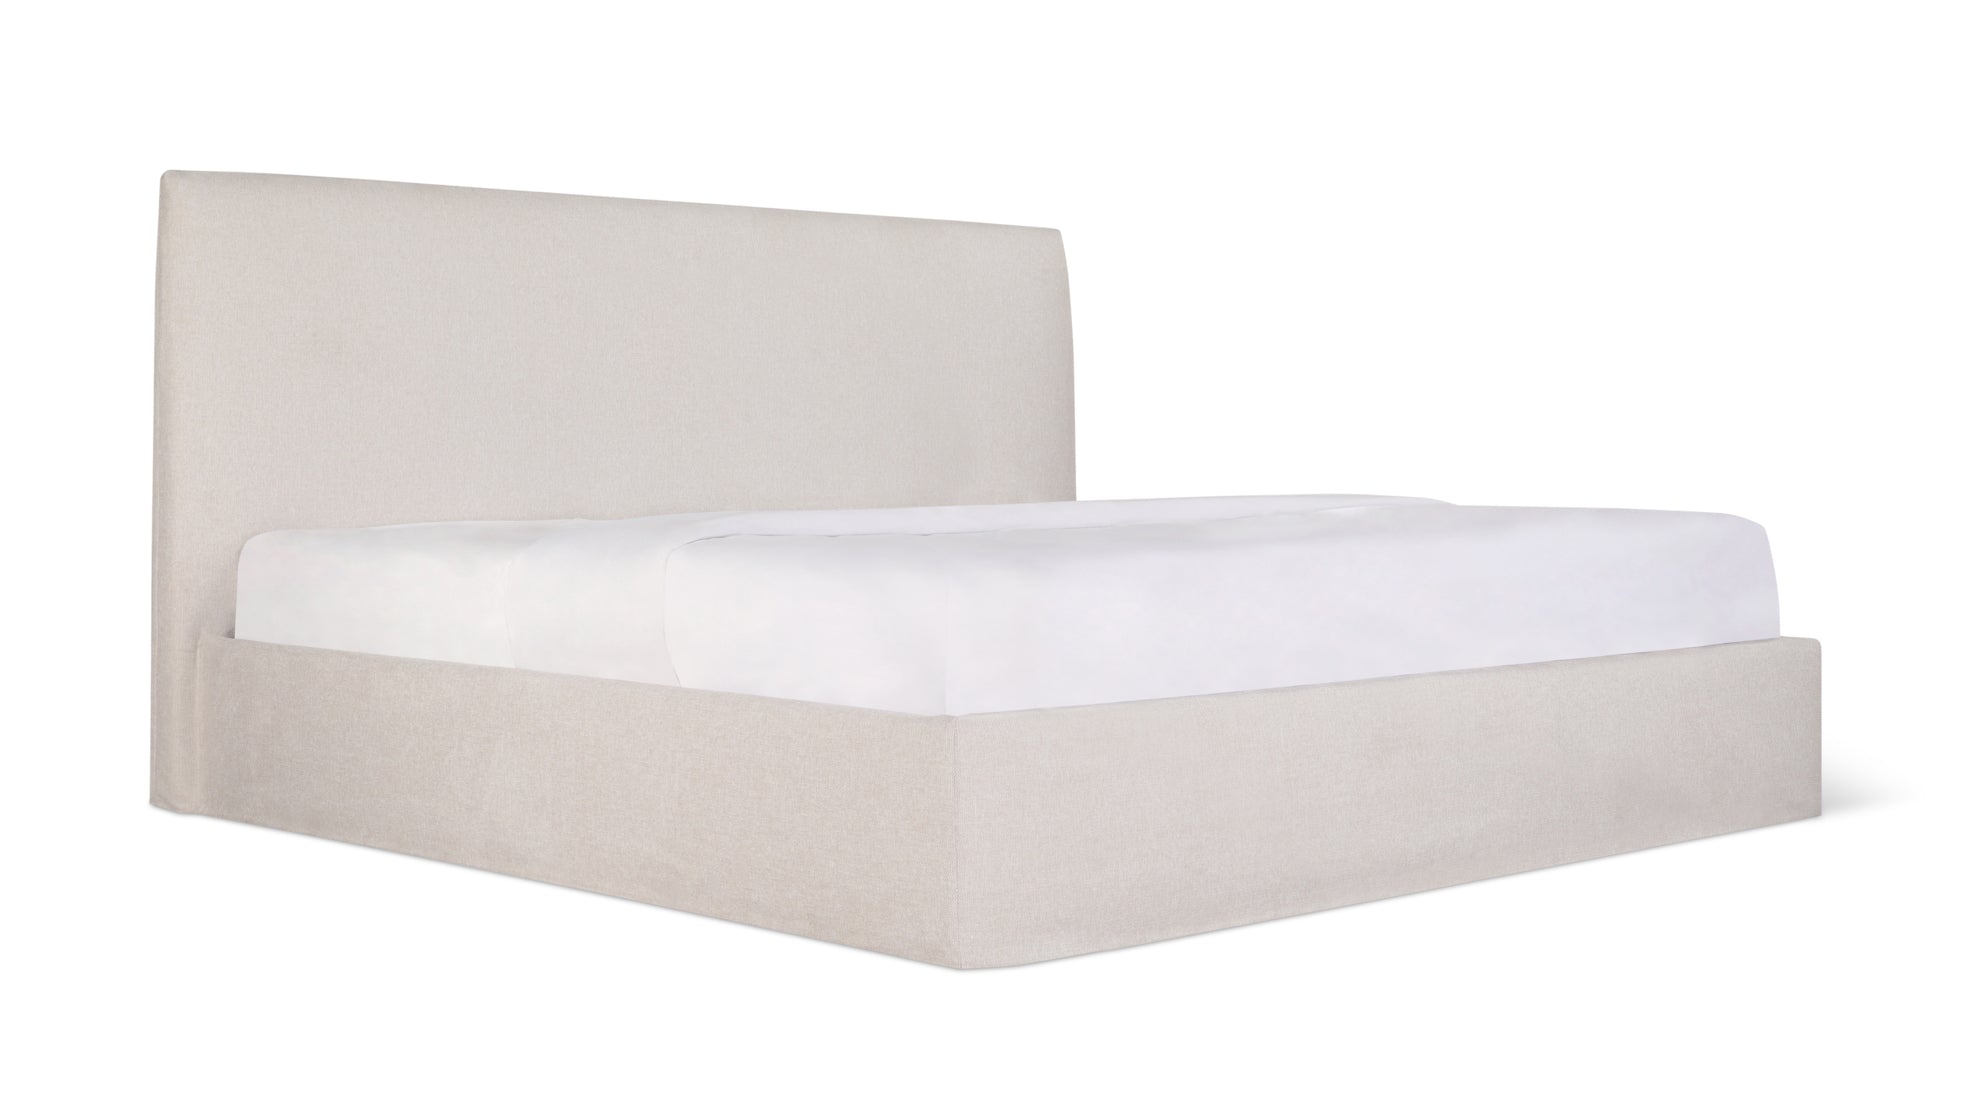 Wave Bed High Headboard with Storage, Queen, Latte - Image 4